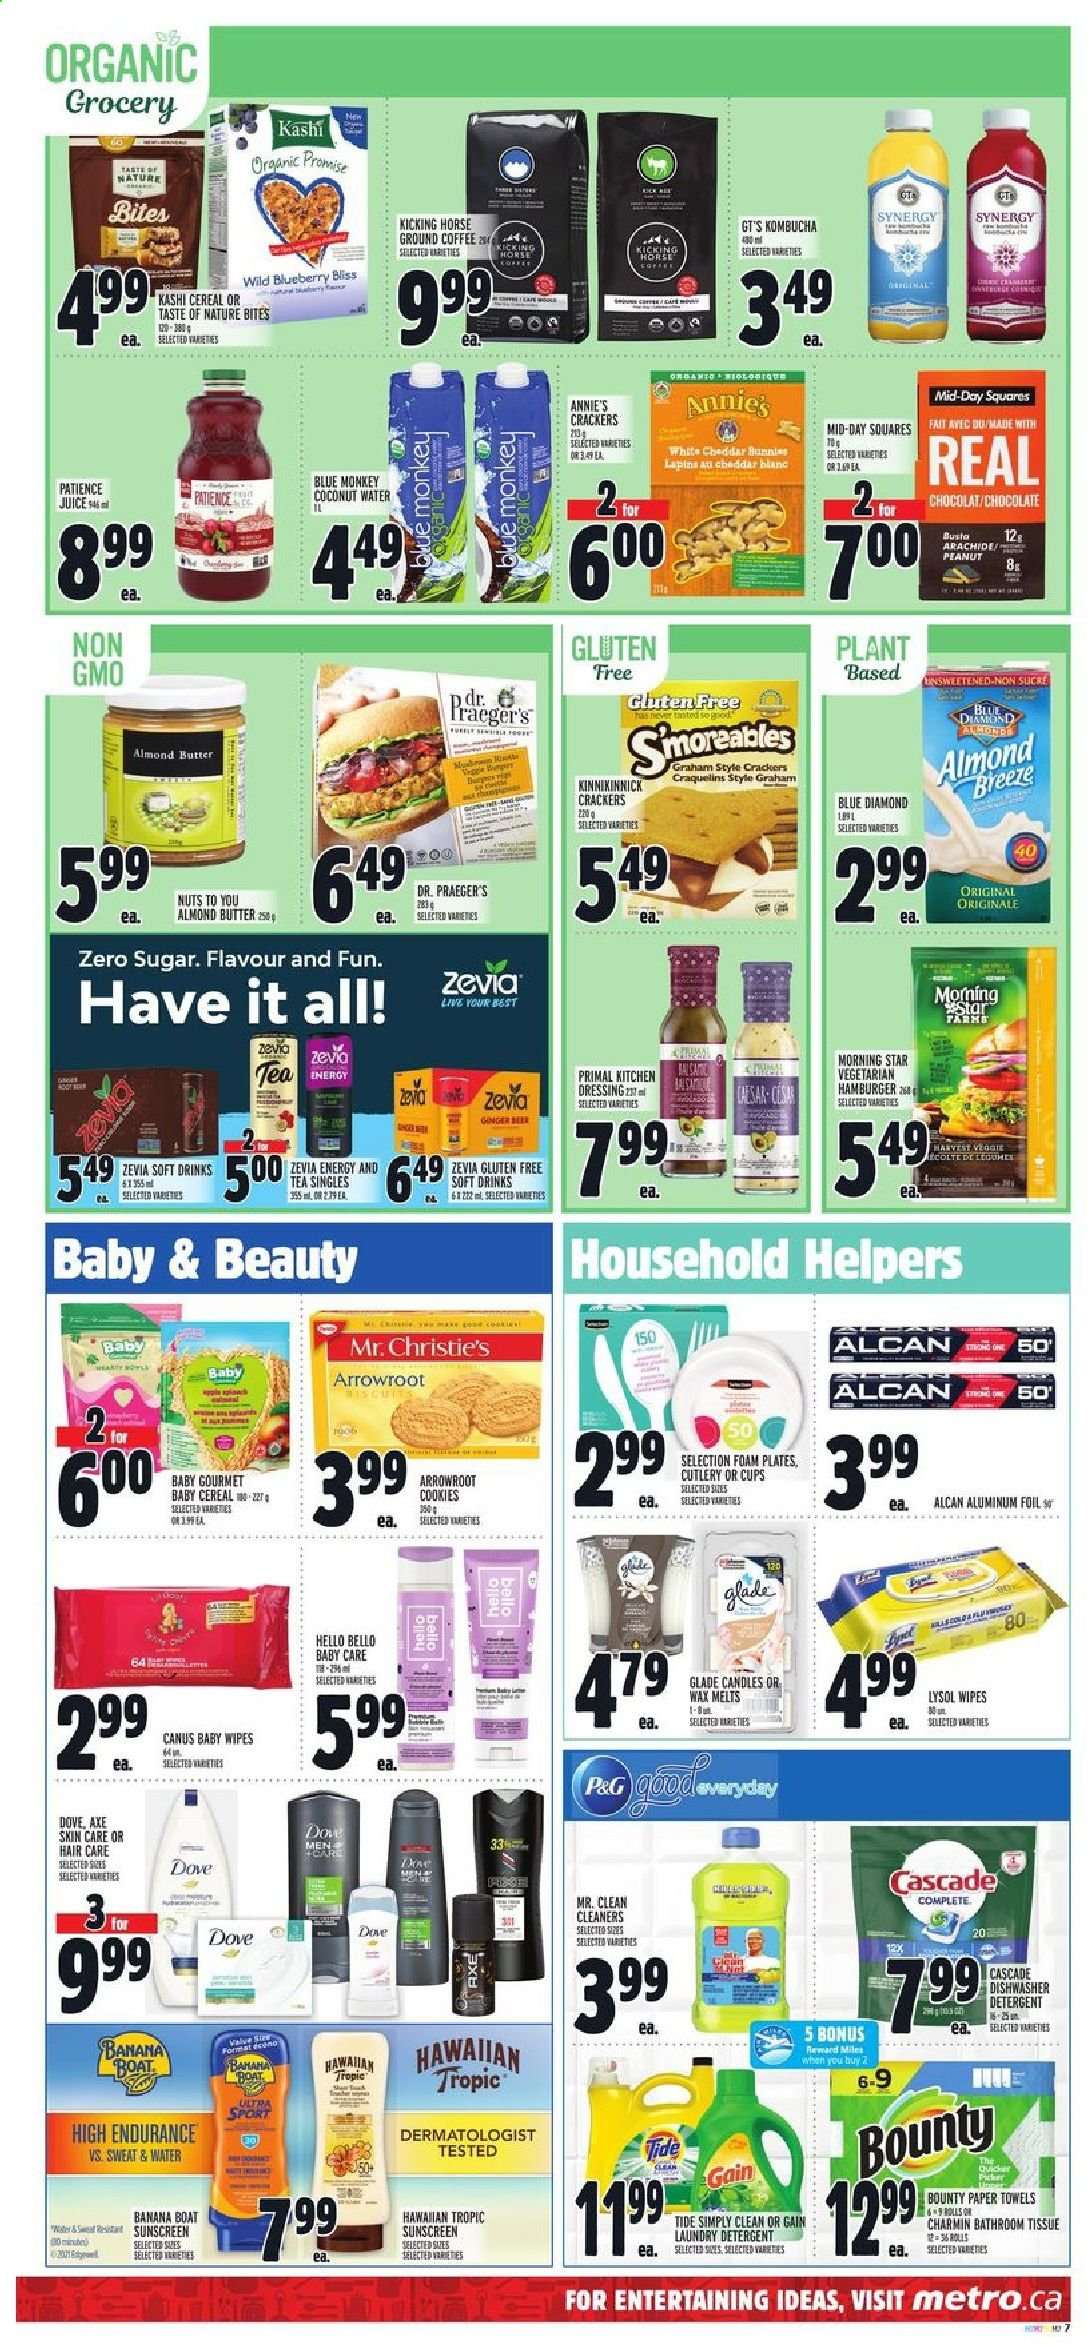 thumbnail - Metro Flyer - July 15, 2021 - July 21, 2021 - Sales products - hamburger, Annie's, Almond Breeze, almond butter, cookies, chocolate, Bounty, crackers, cereals, dressing, juice, soft drink, kombucha, tea, coffee, ground coffee, L'Or, beer, ginger beer, wipes, baby wipes, bath tissue, kitchen towels, paper towels, Charmin, Gain, Lysol, Tide, laundry detergent, Cascade, plate, cup, aluminium foil, candle, Glade, foam plates, Primal. Page 9.